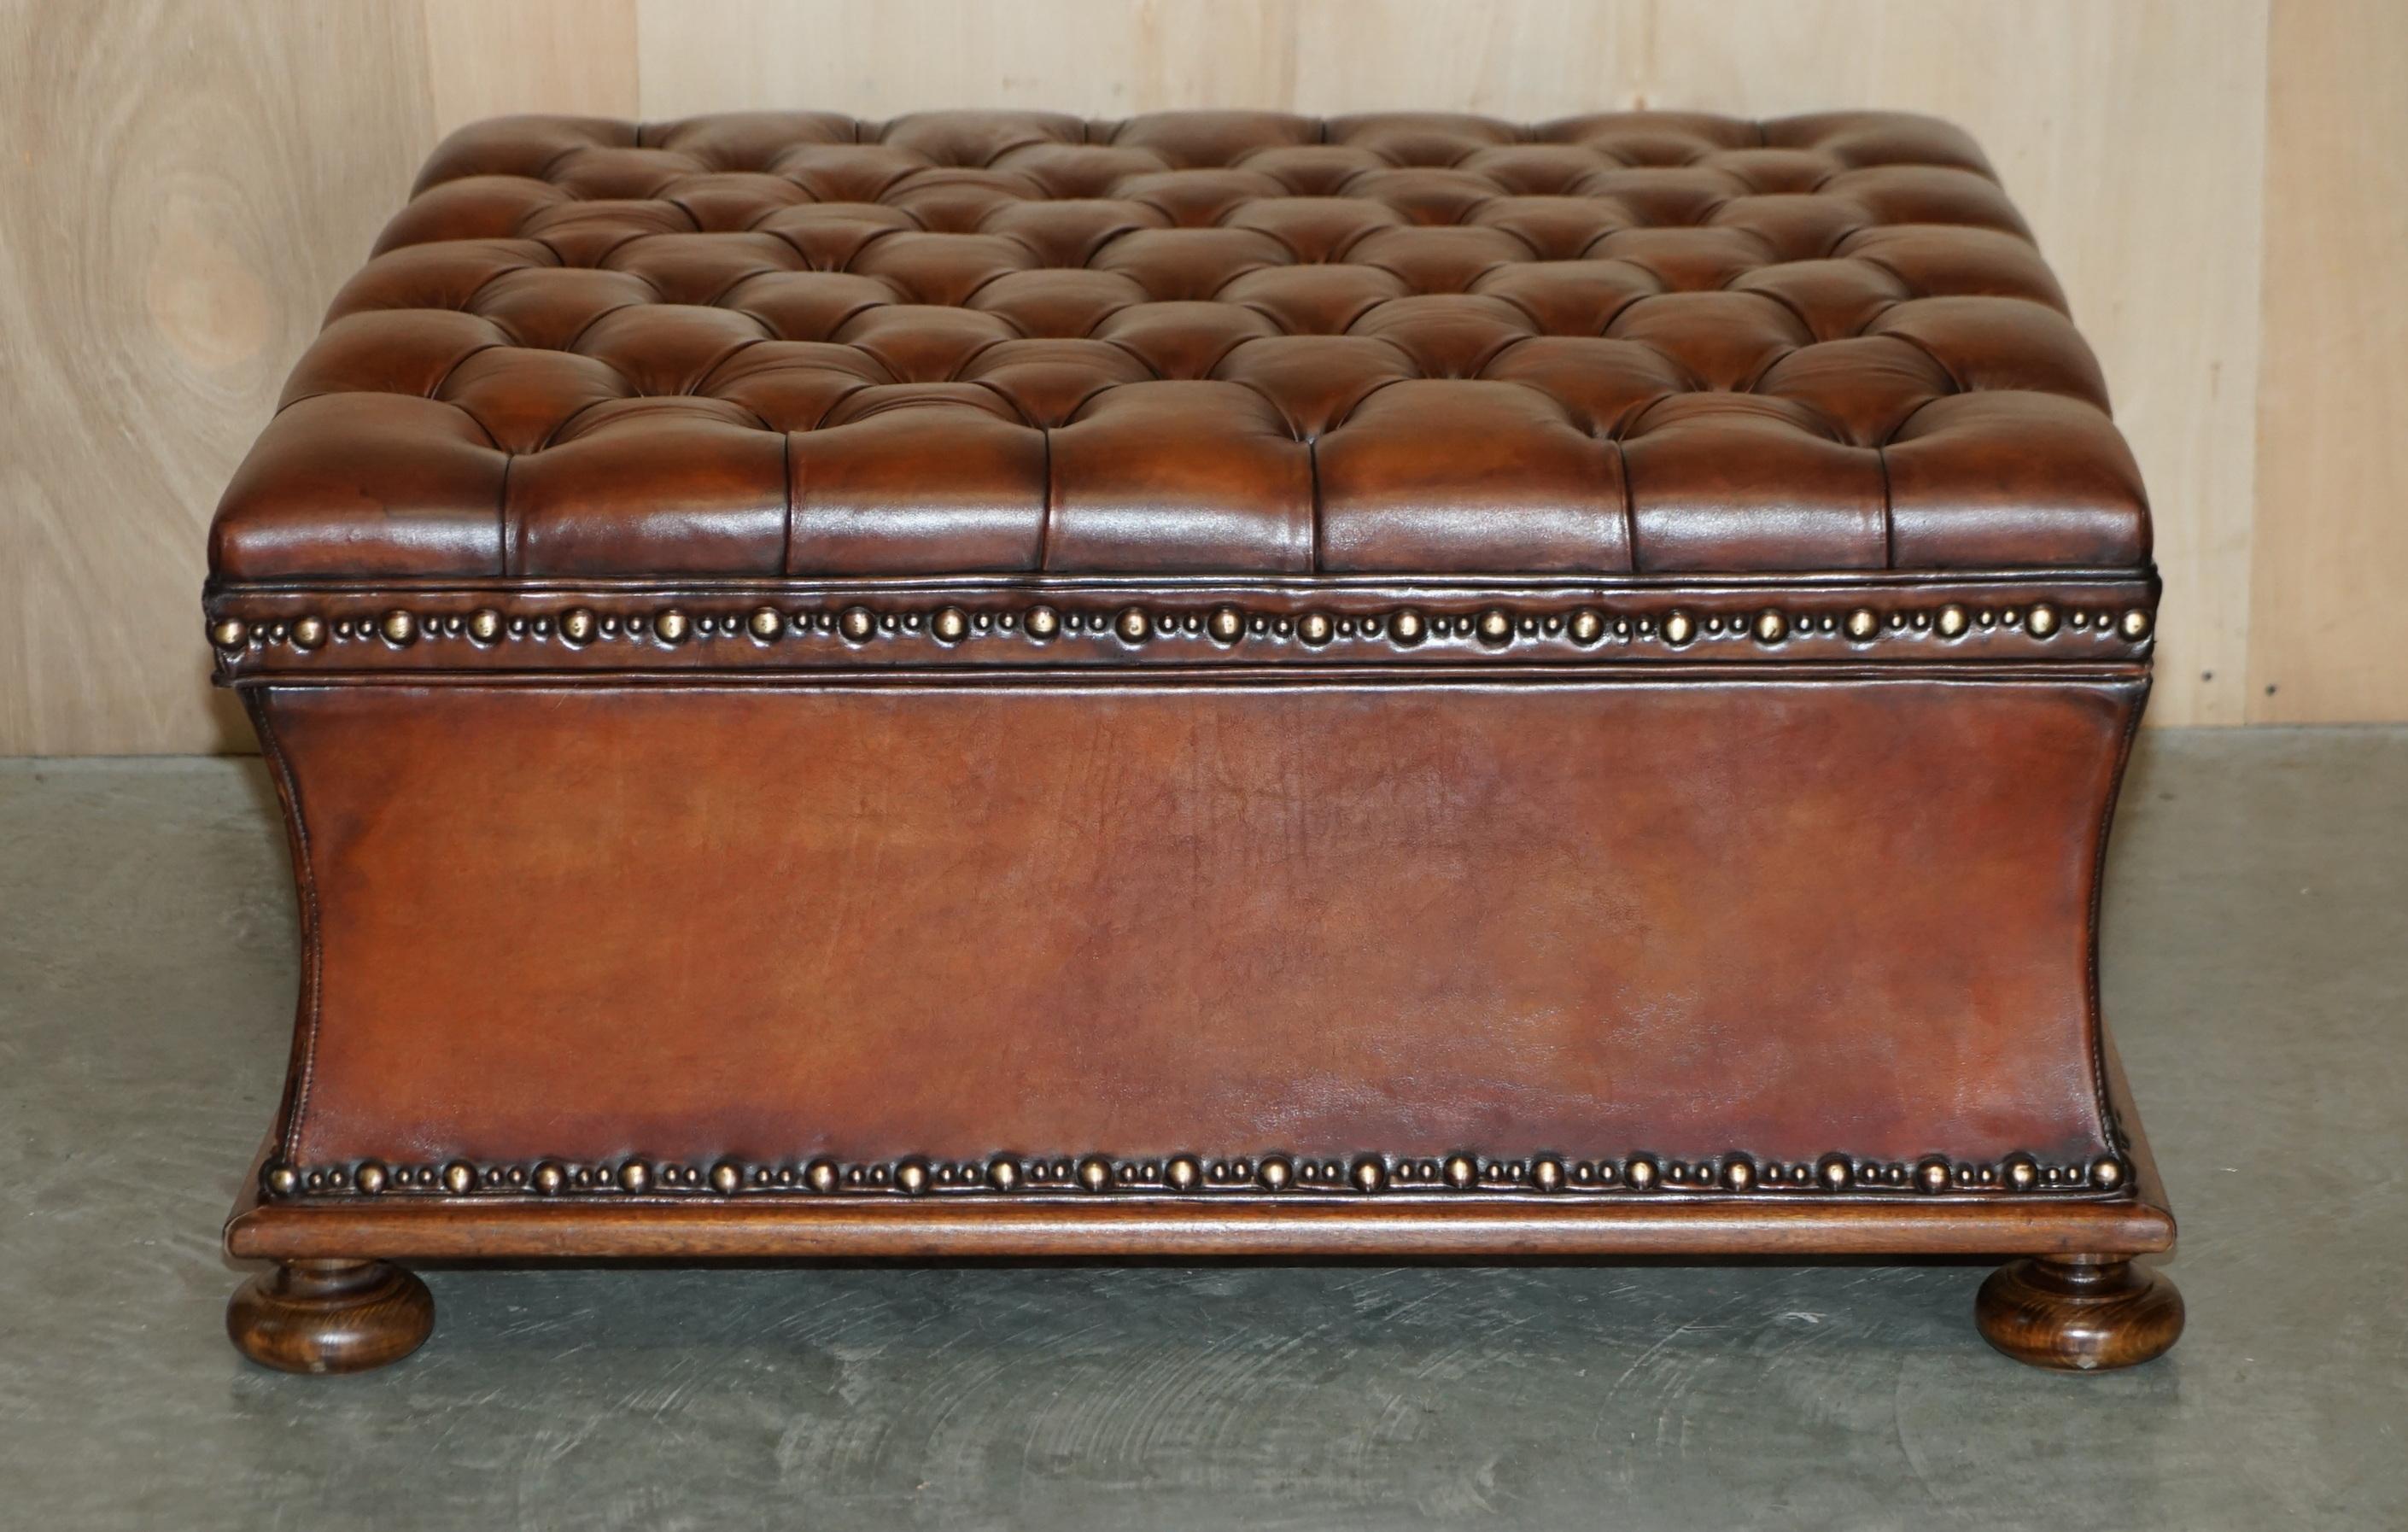 We are delighted to offer for sale this absolutely massive, fully restored Ralph Lauren, hand dyed cigar brown leather Victorian style ottoman with huge amounts of internal storage 

This is one of the most impressive pieces I have seen in a long